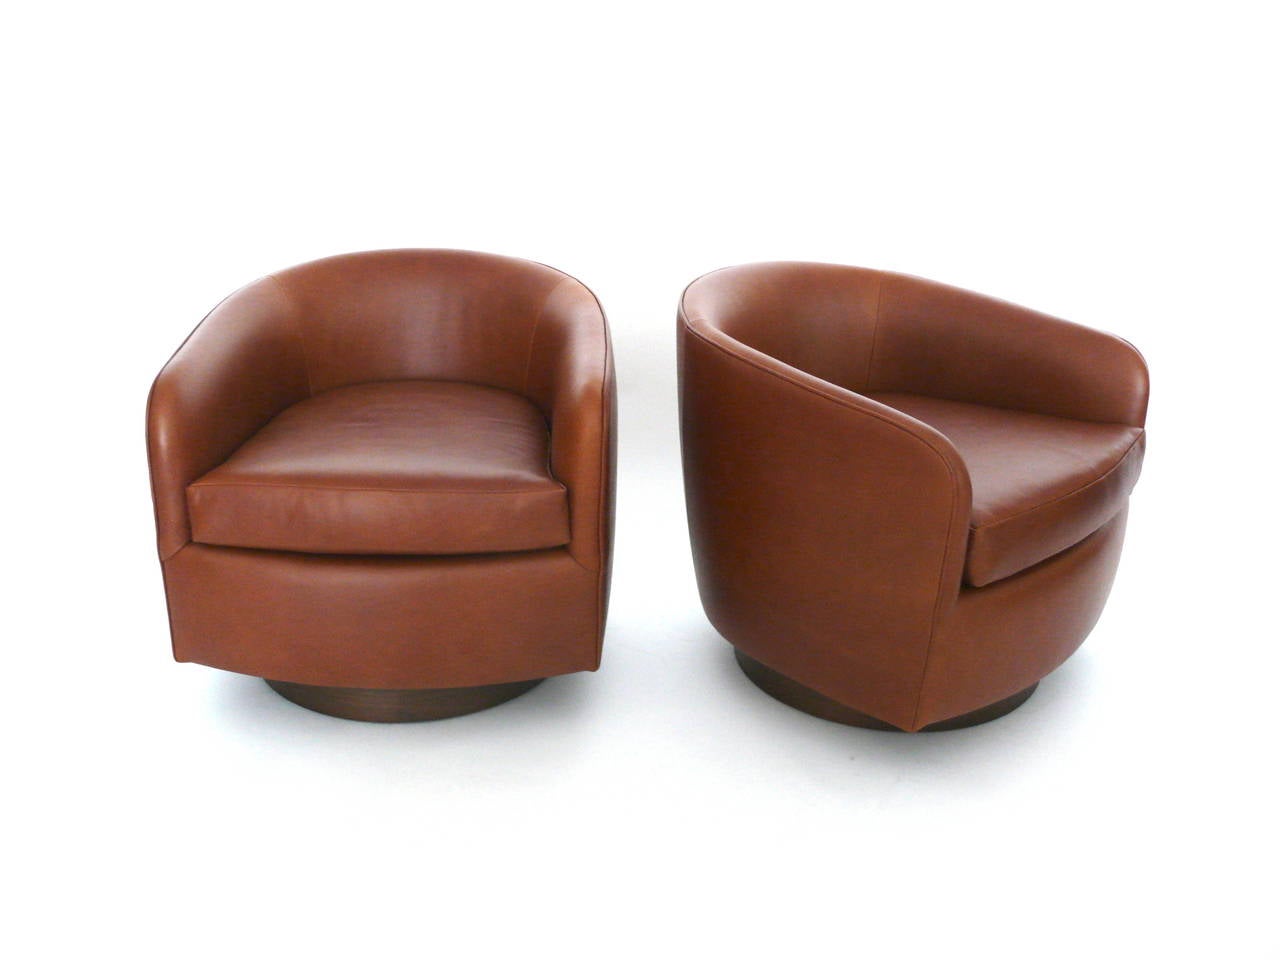 Handsome pair of swivel chairs in the style of Milo Baughman. Newly upholstered in saddle leather and resting on a medium walnut base. Extremely comfortable and classic design. Perfect for the home or office. Custom leather options also available.